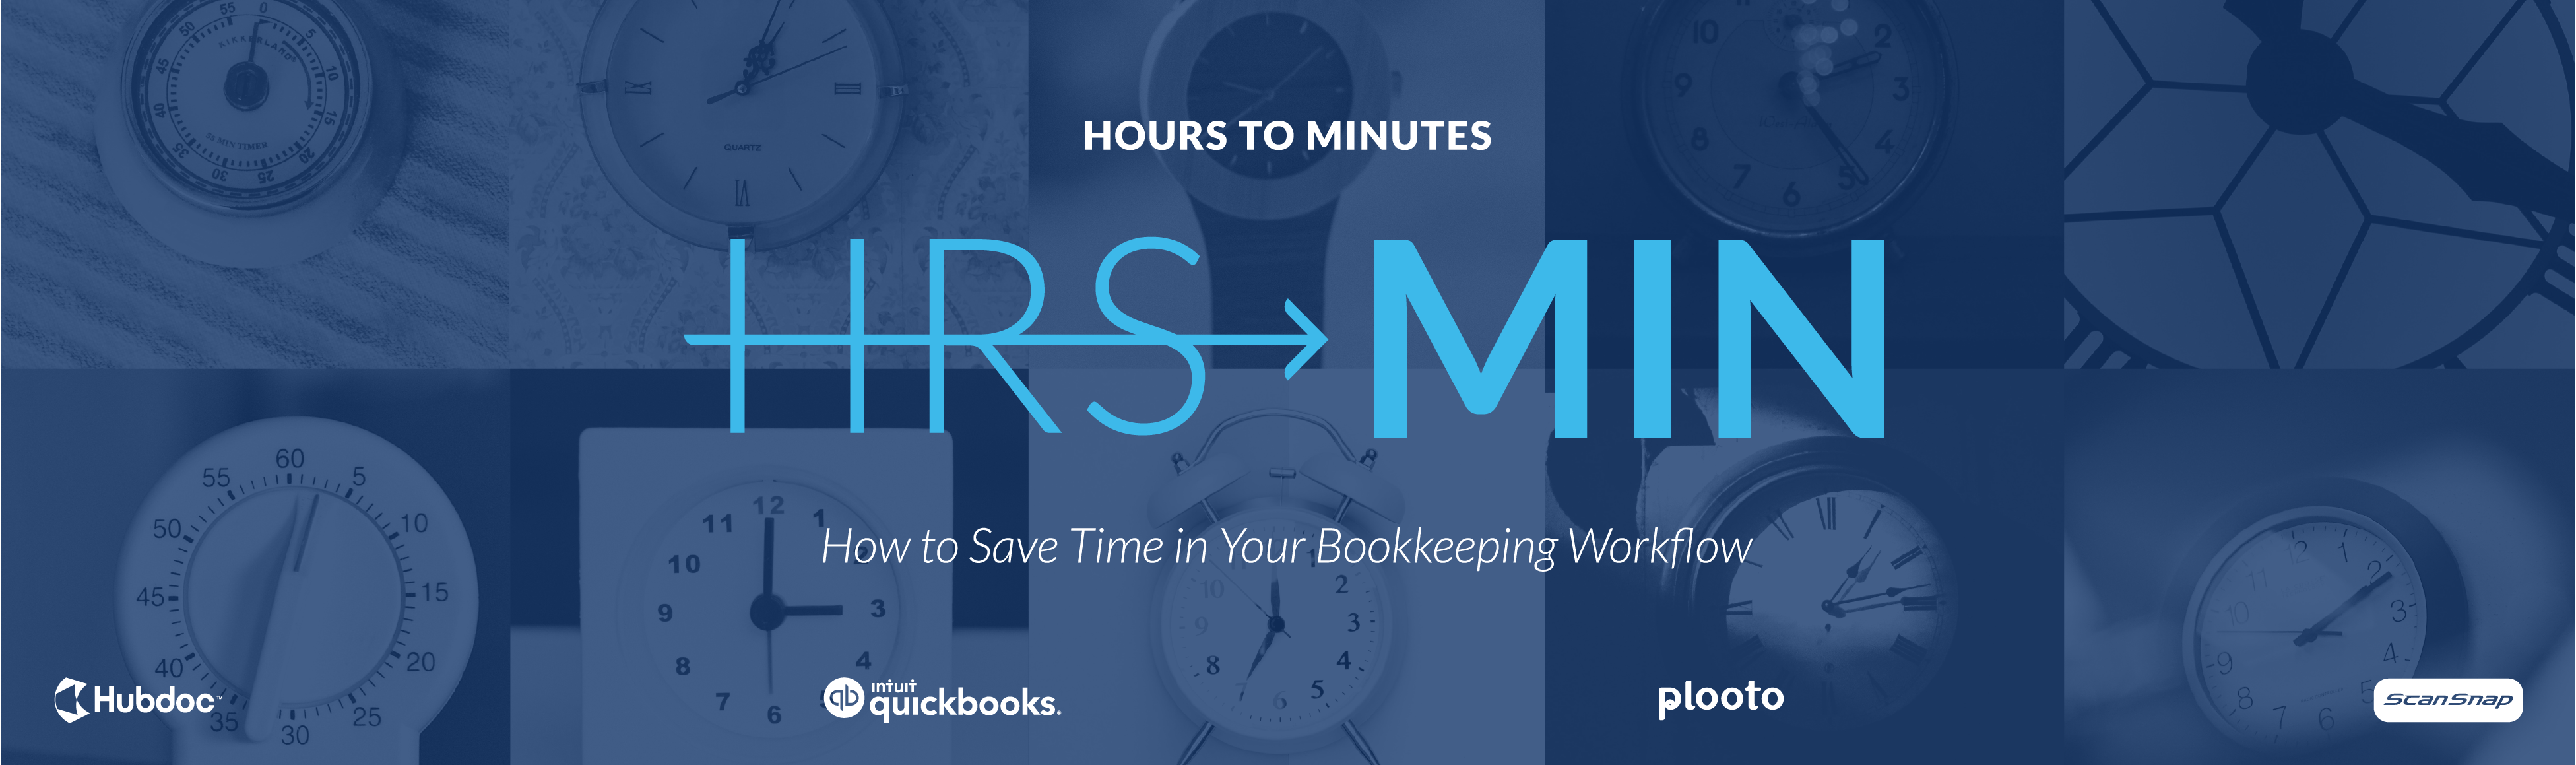 Hours to Minutes: How to Save Time in Your Bookkeeping Workflow